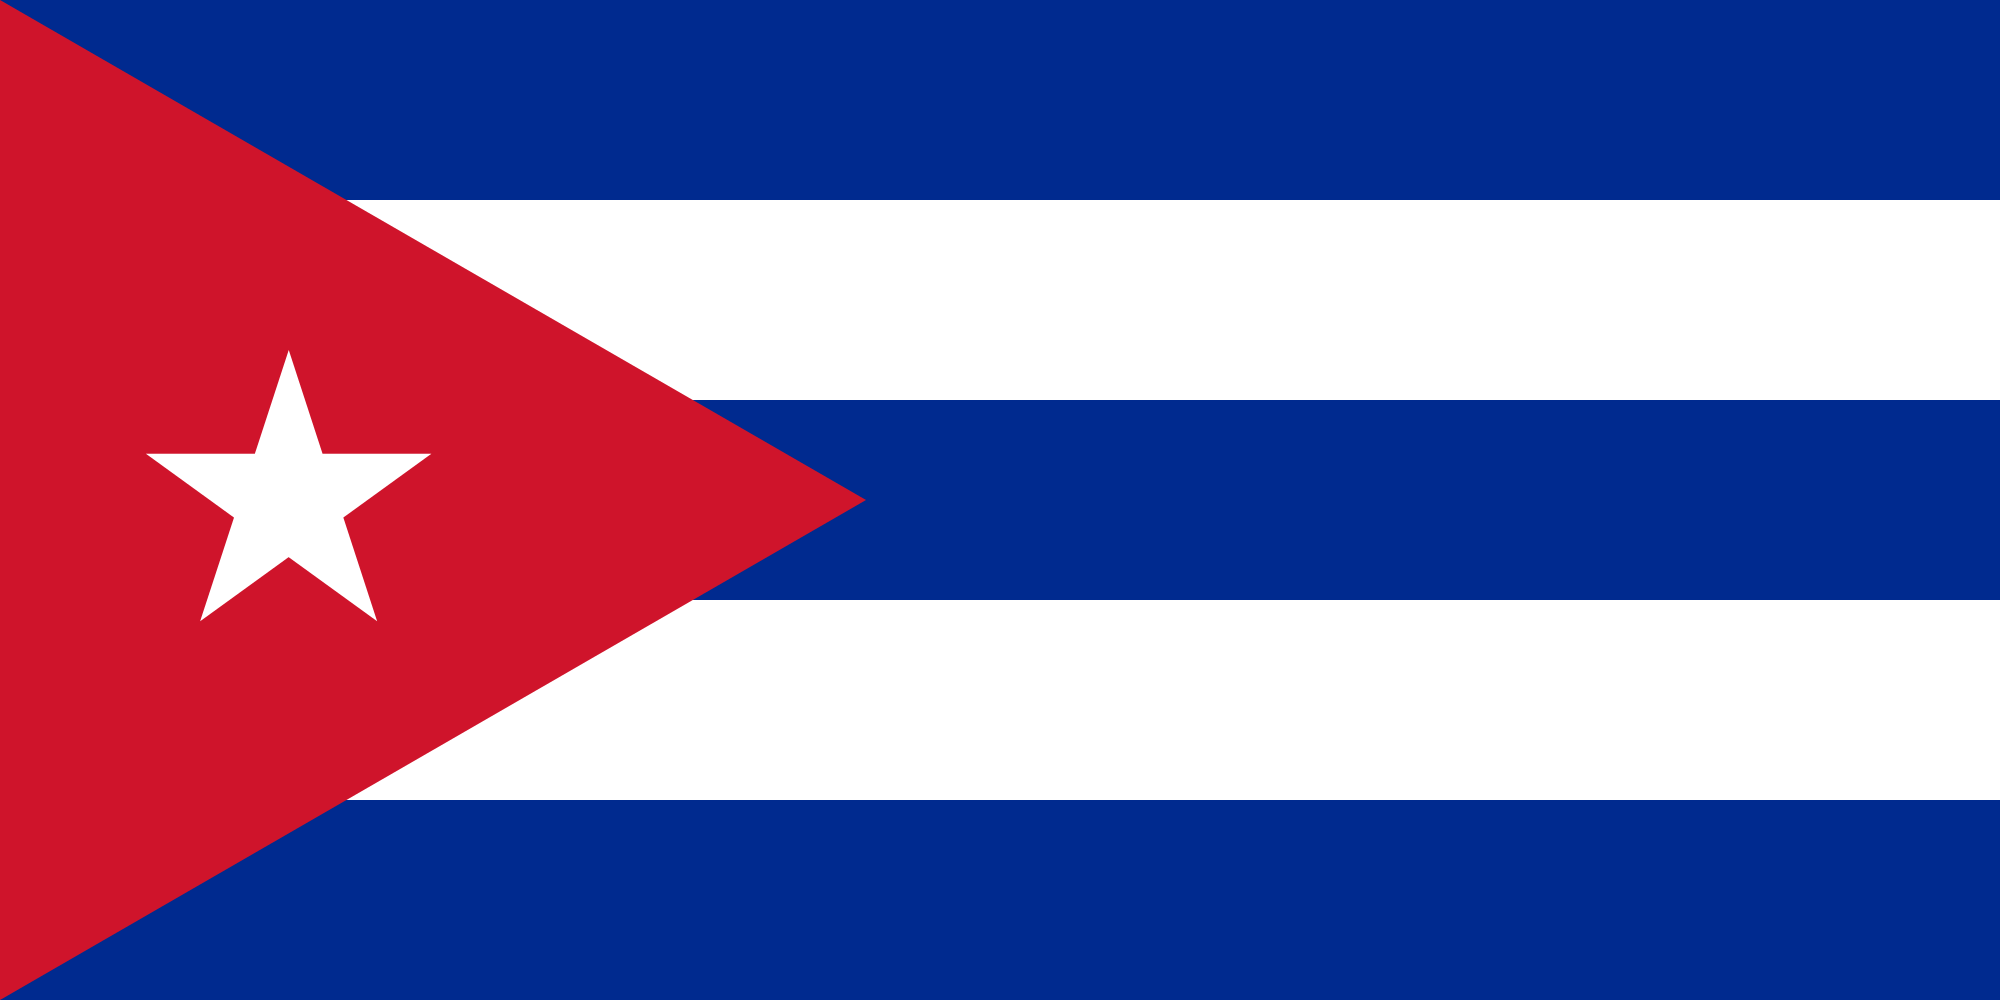 Blue and Red Triangle Logo - Flag of Cuba